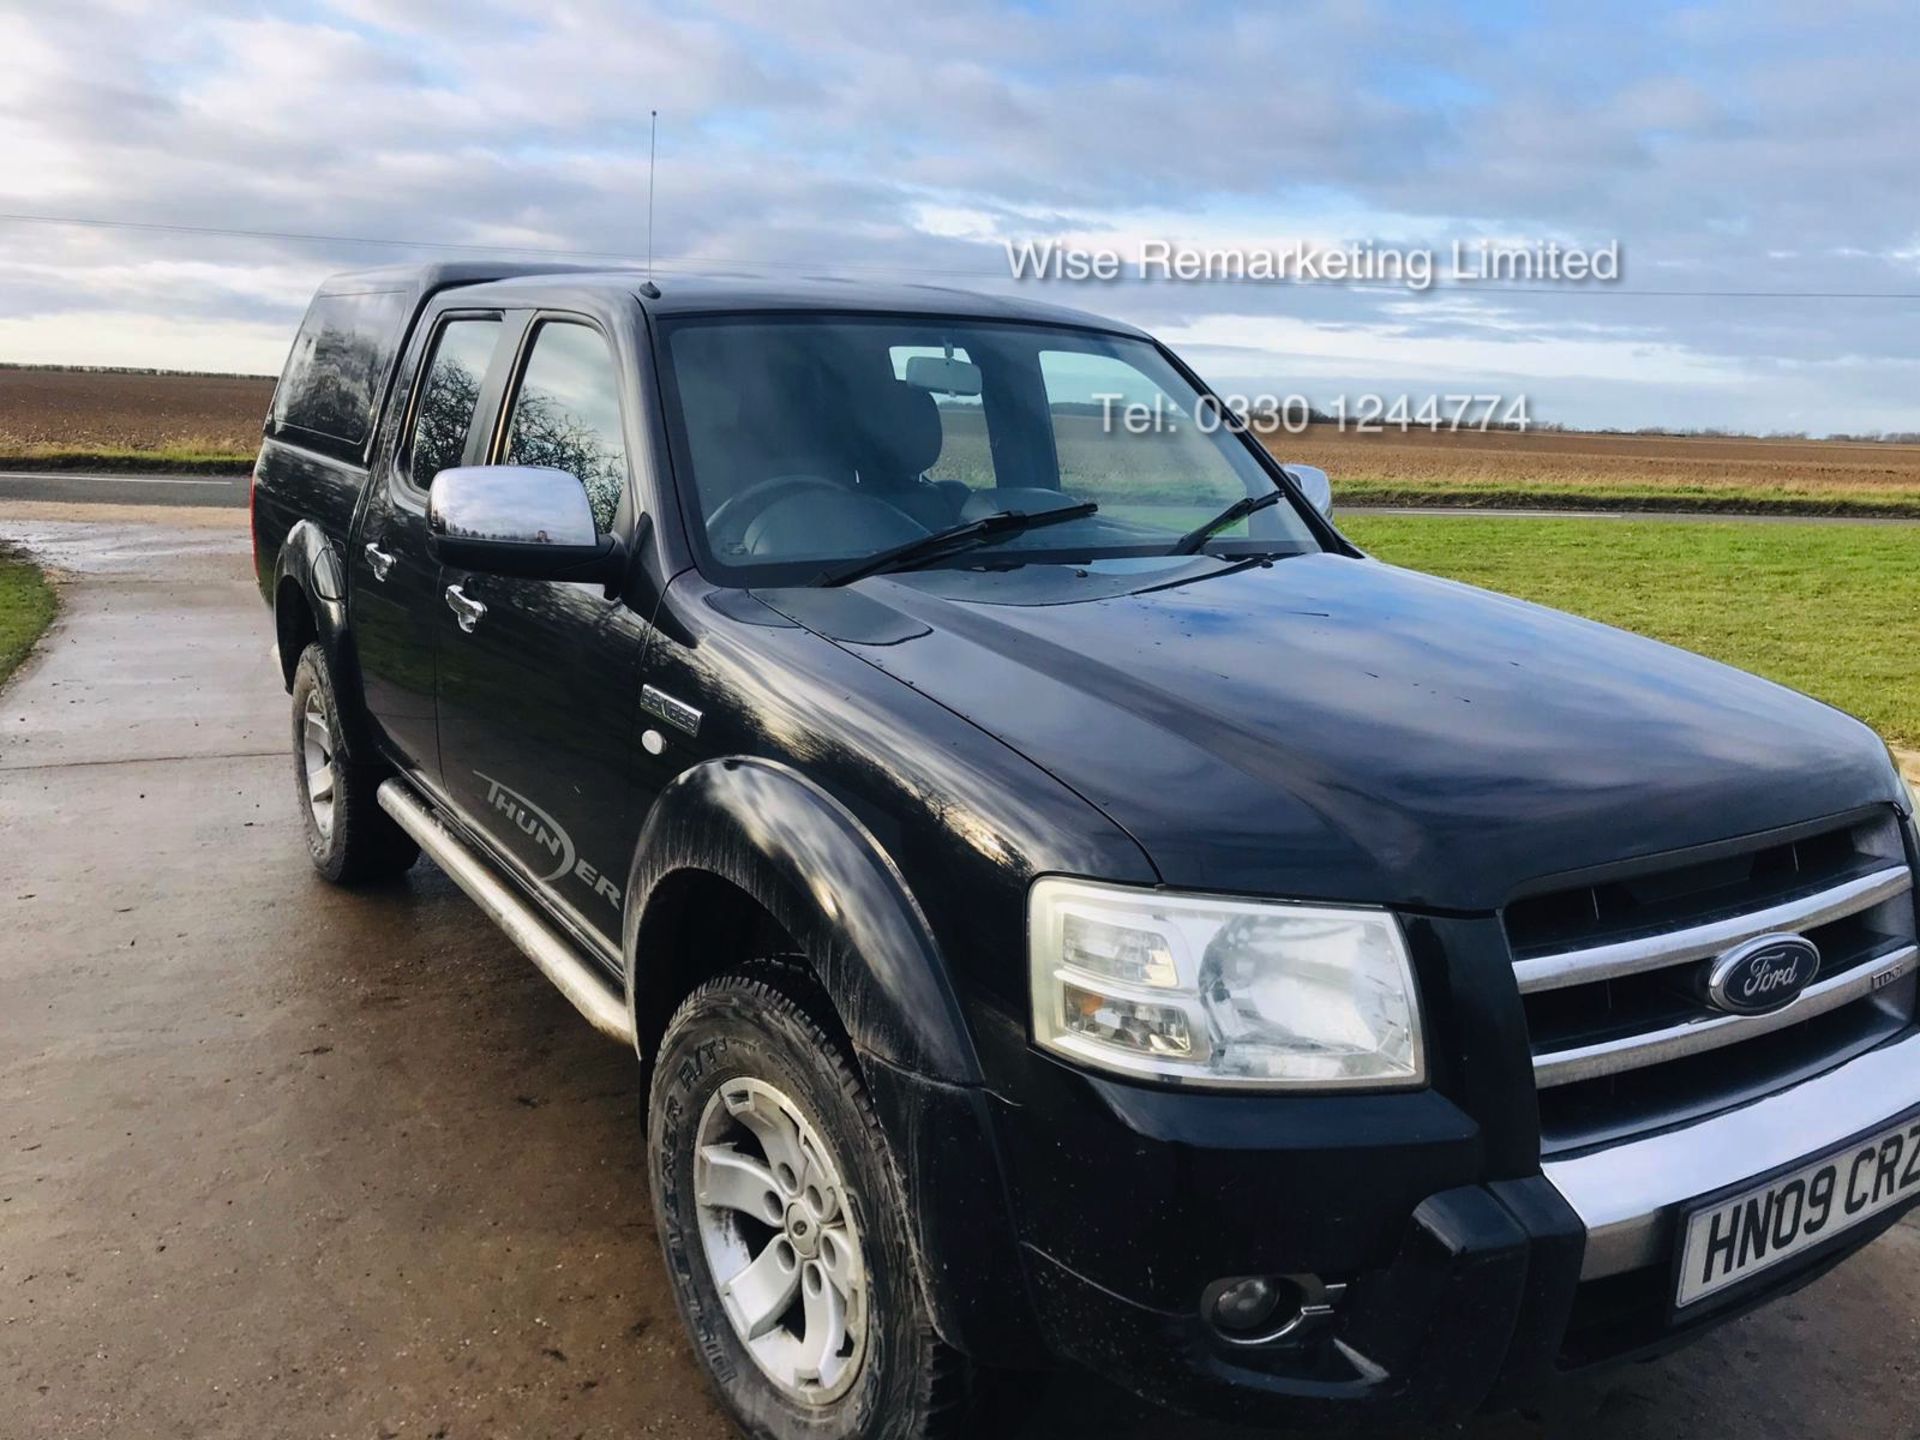 Ford Ranger Thunder 2.5 Double Cab Pick Up - 2009 09 Reg - 4x4 - Service History - Full Leather - Image 6 of 17